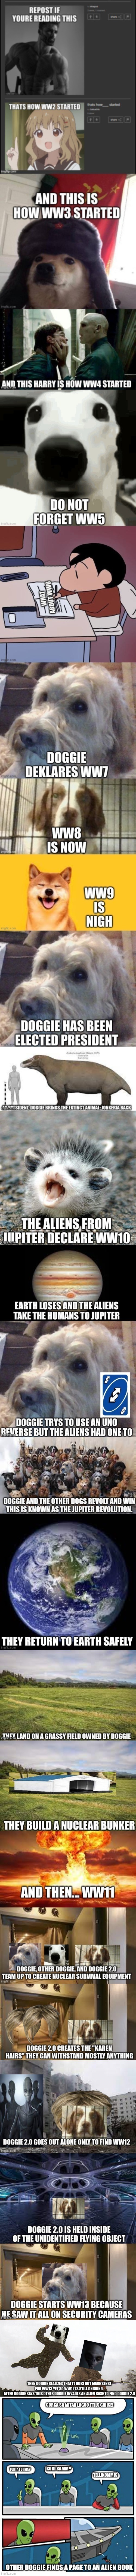 THEN DOGGIE REALIZES THAT IT DOES NOT MAKE SENSE FOR WW13 YET SO WW12 IS STILL ONGOING.
AFTER DOGGIE SAYS THIS OTHER DOGGIE INVADES AN ALIEN BASE TO FIND DOGGIE 2.0; GORGA SA MITAR LAGOO TTILS GAIISE! TORTA FORMA? KORI SAMM? TELLIKOMMIS; OTHER DOGGIE FINDS A PAGE TO AN ALIEN BOOK | image tagged in memes,long,not finished | made w/ Imgflip meme maker